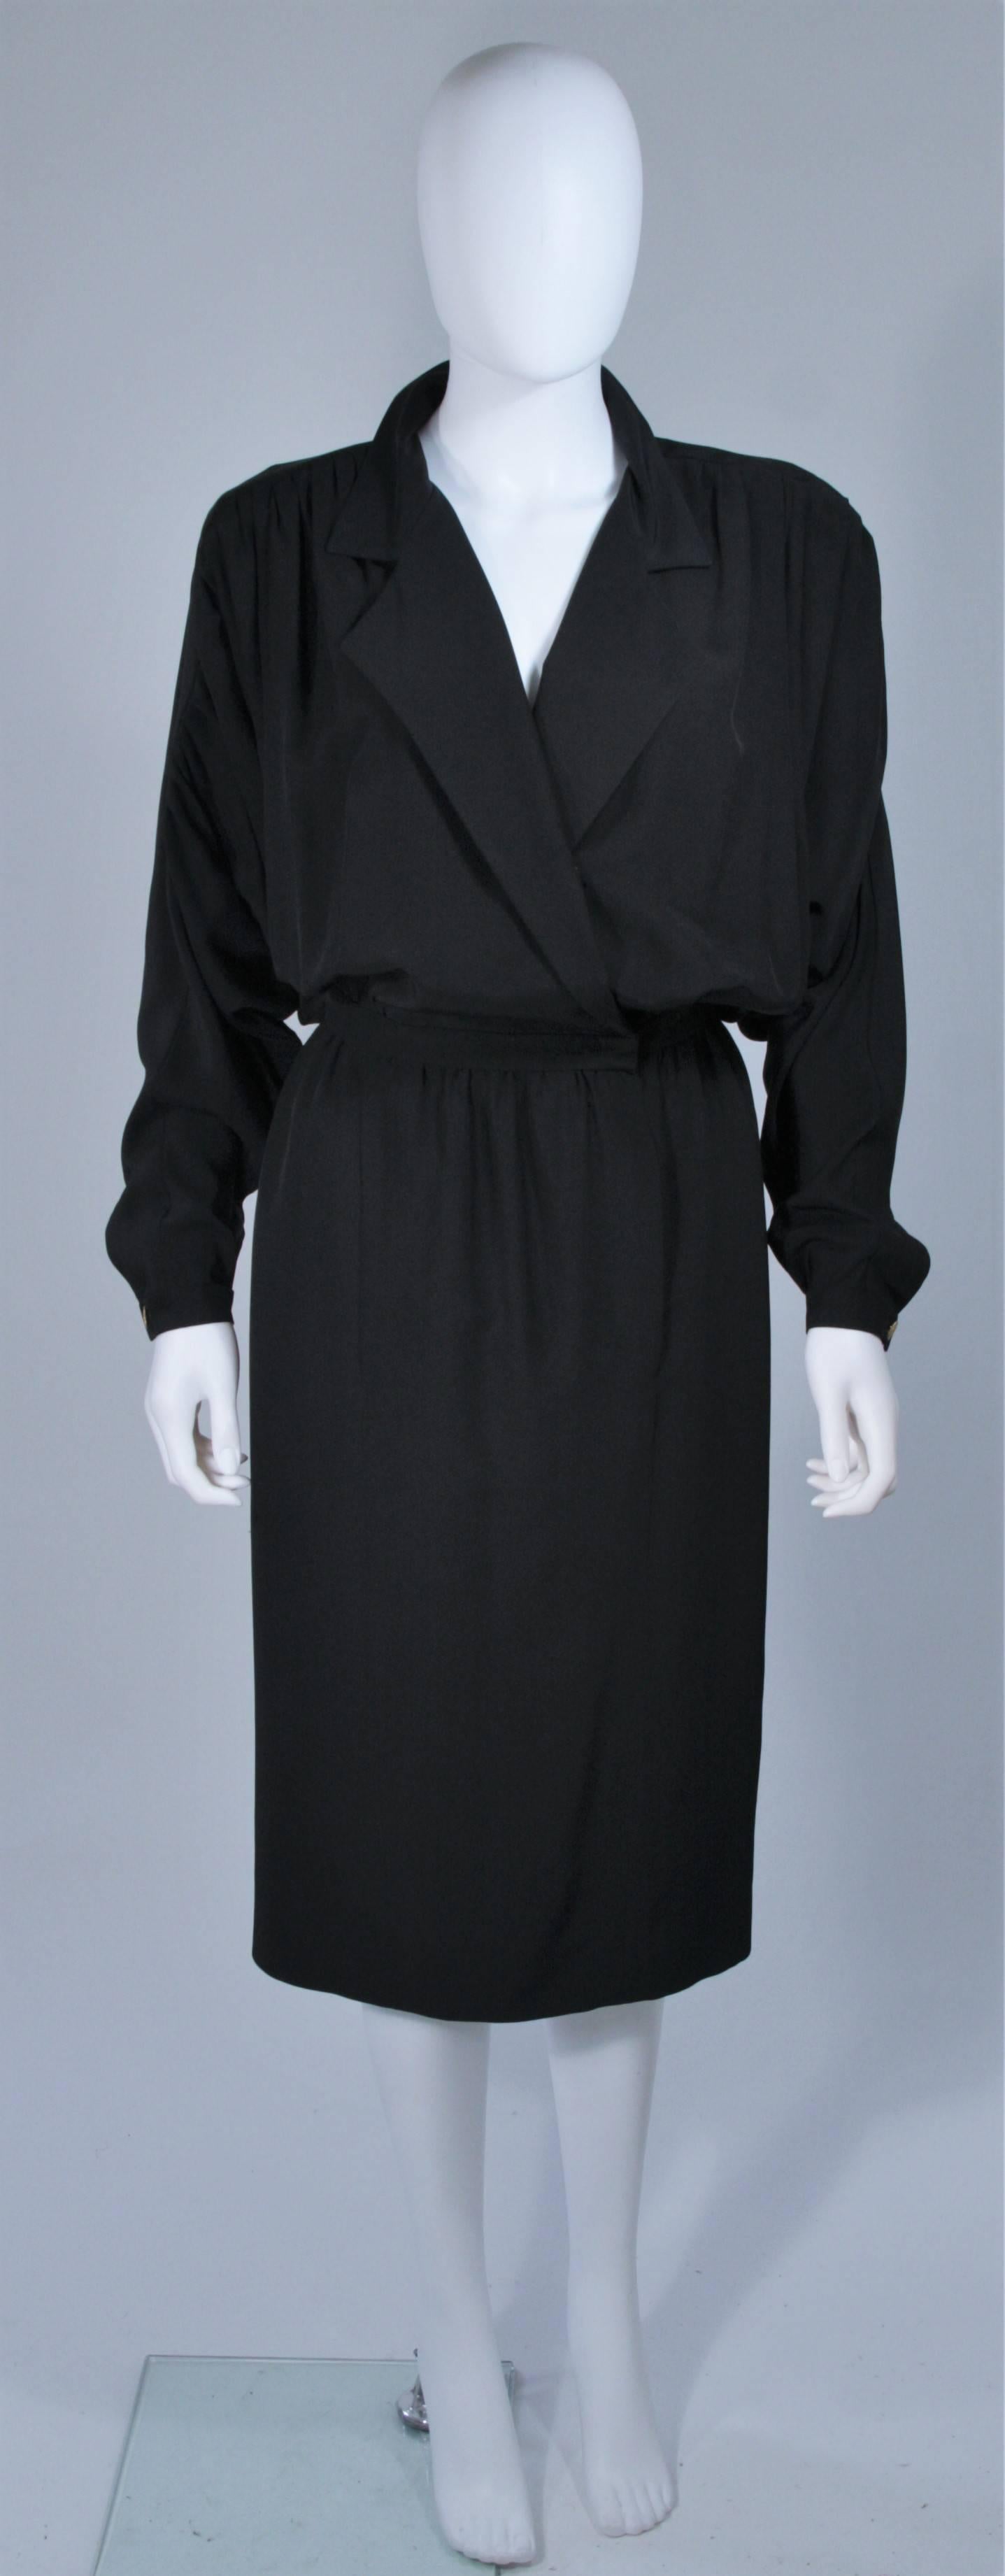  This Chanel dress is composed of a black silk. The draped style features dolman style sleeves and gathers/pleates at the shoulders. There is a center front closure. In excellent vintage condition. 

**Please cross-reference measurements for